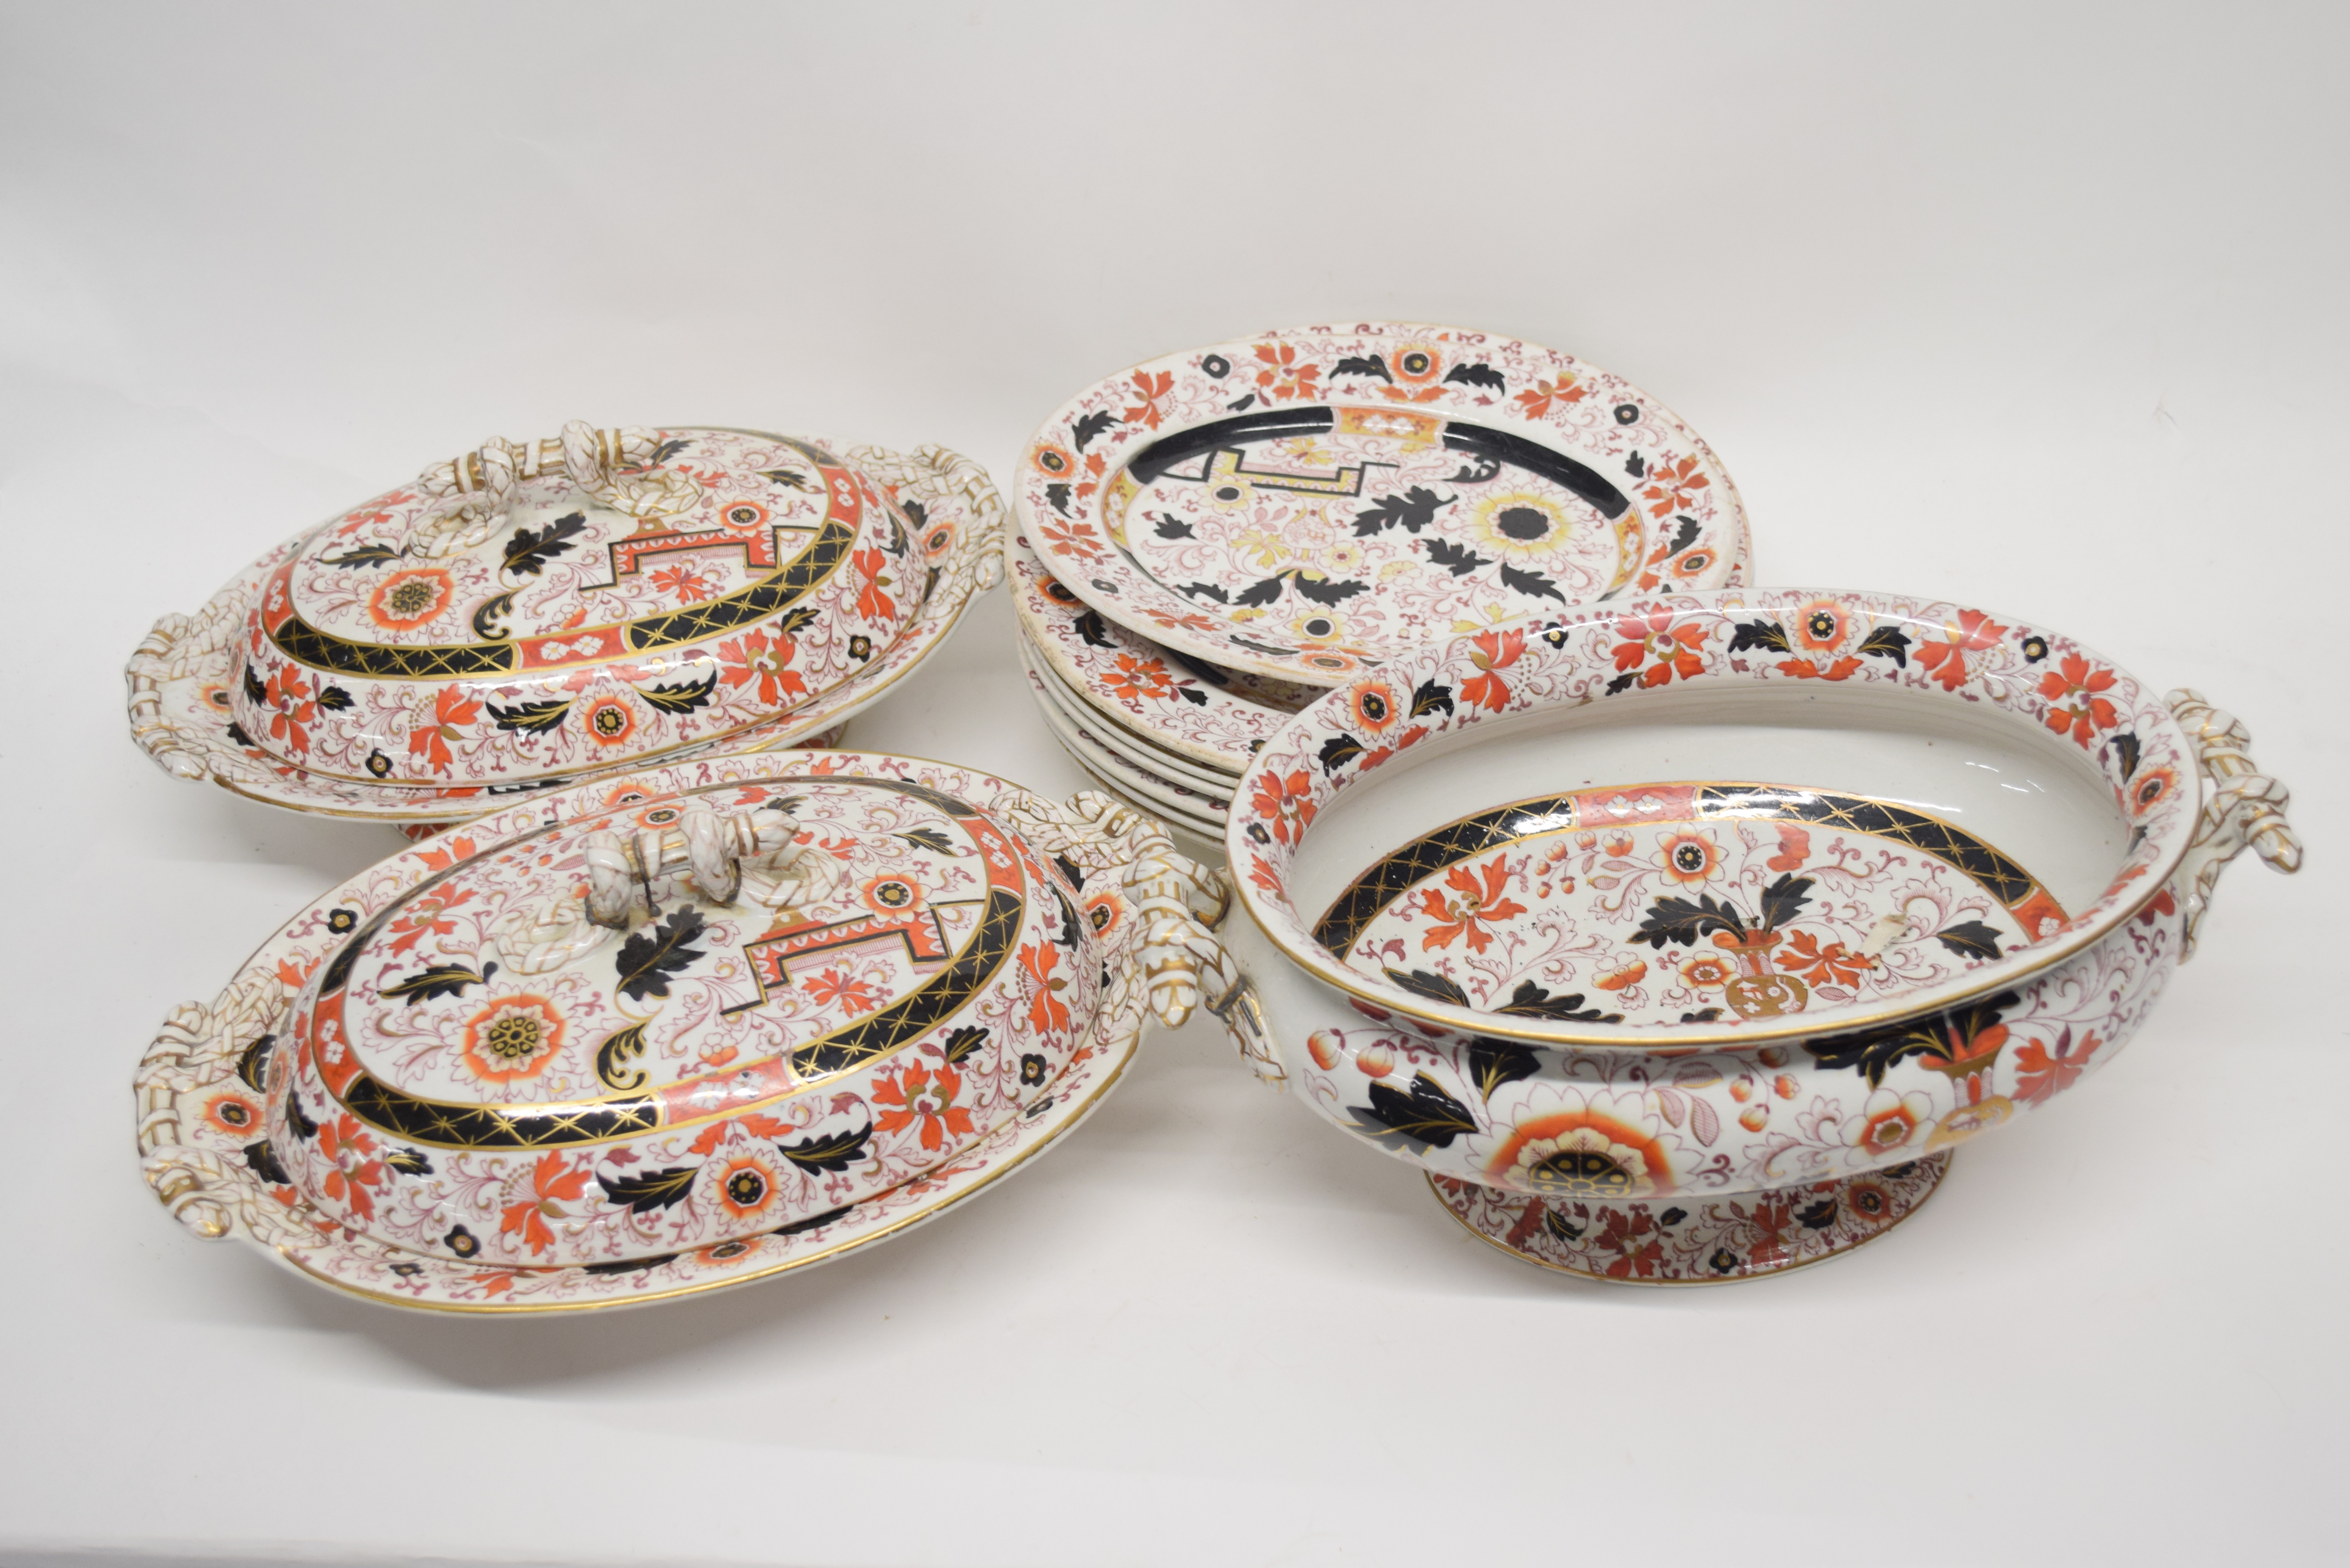 Group of Ashworths Ironstone dinner wares in an Imari pattern including two tureens and covers, - Image 2 of 2